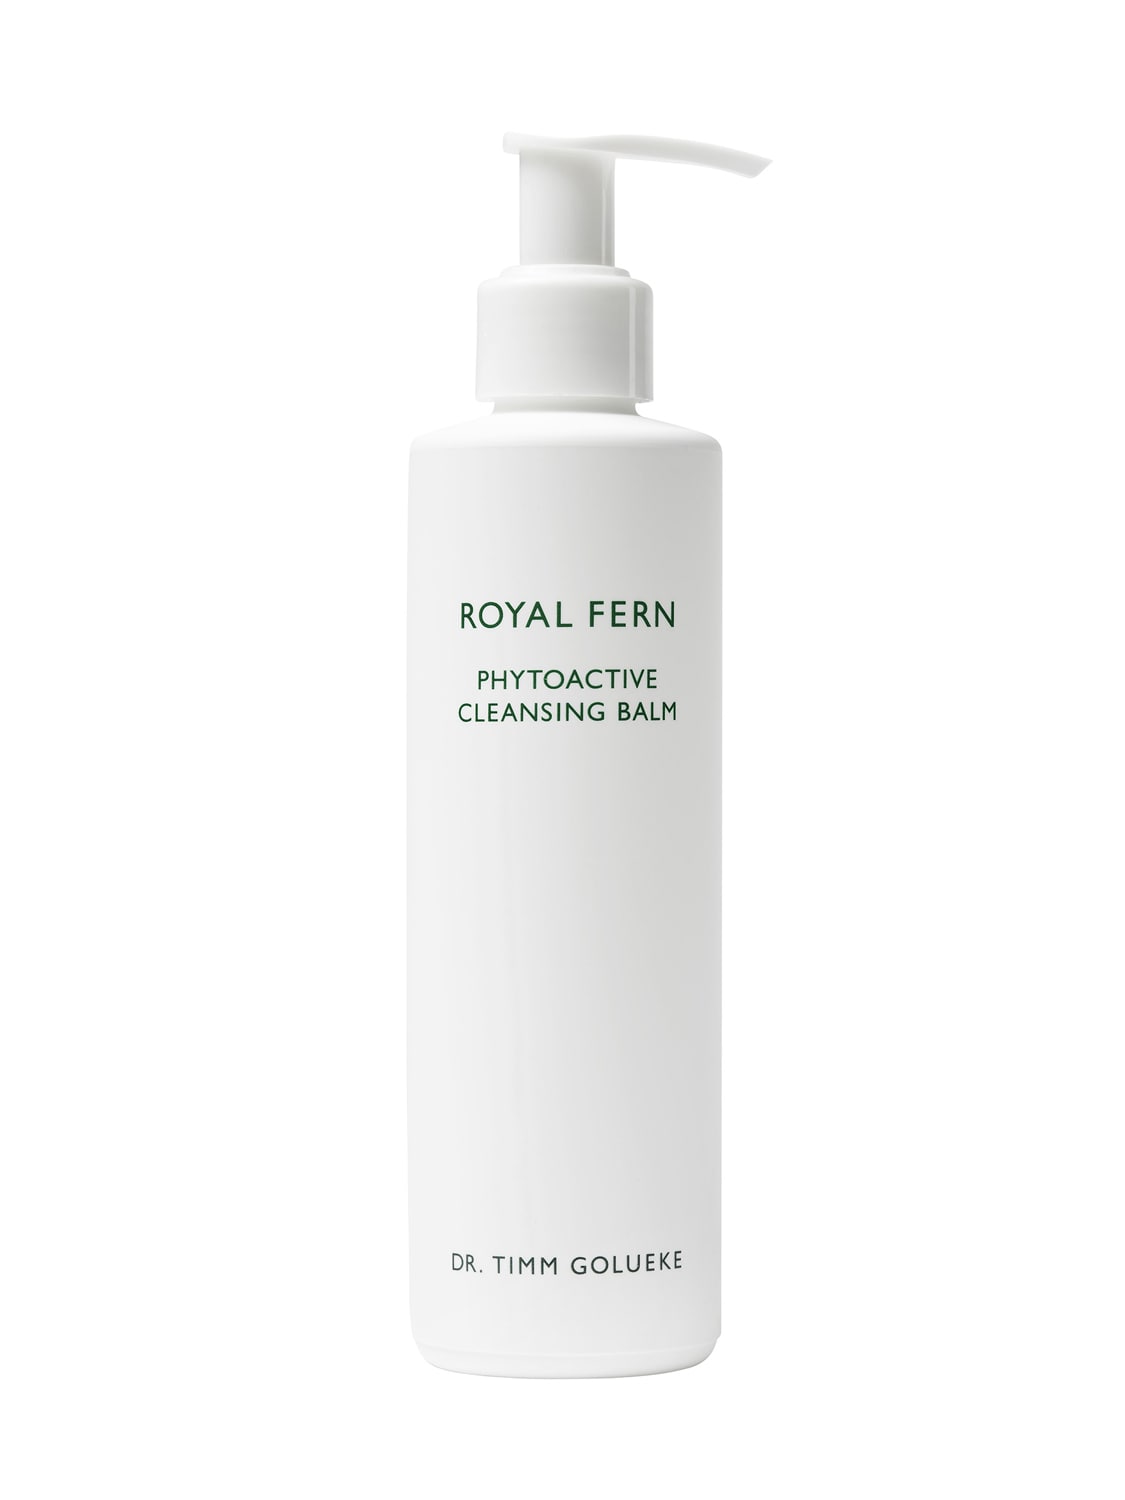 Image of 200ml Phytoactive Cleansing Balm